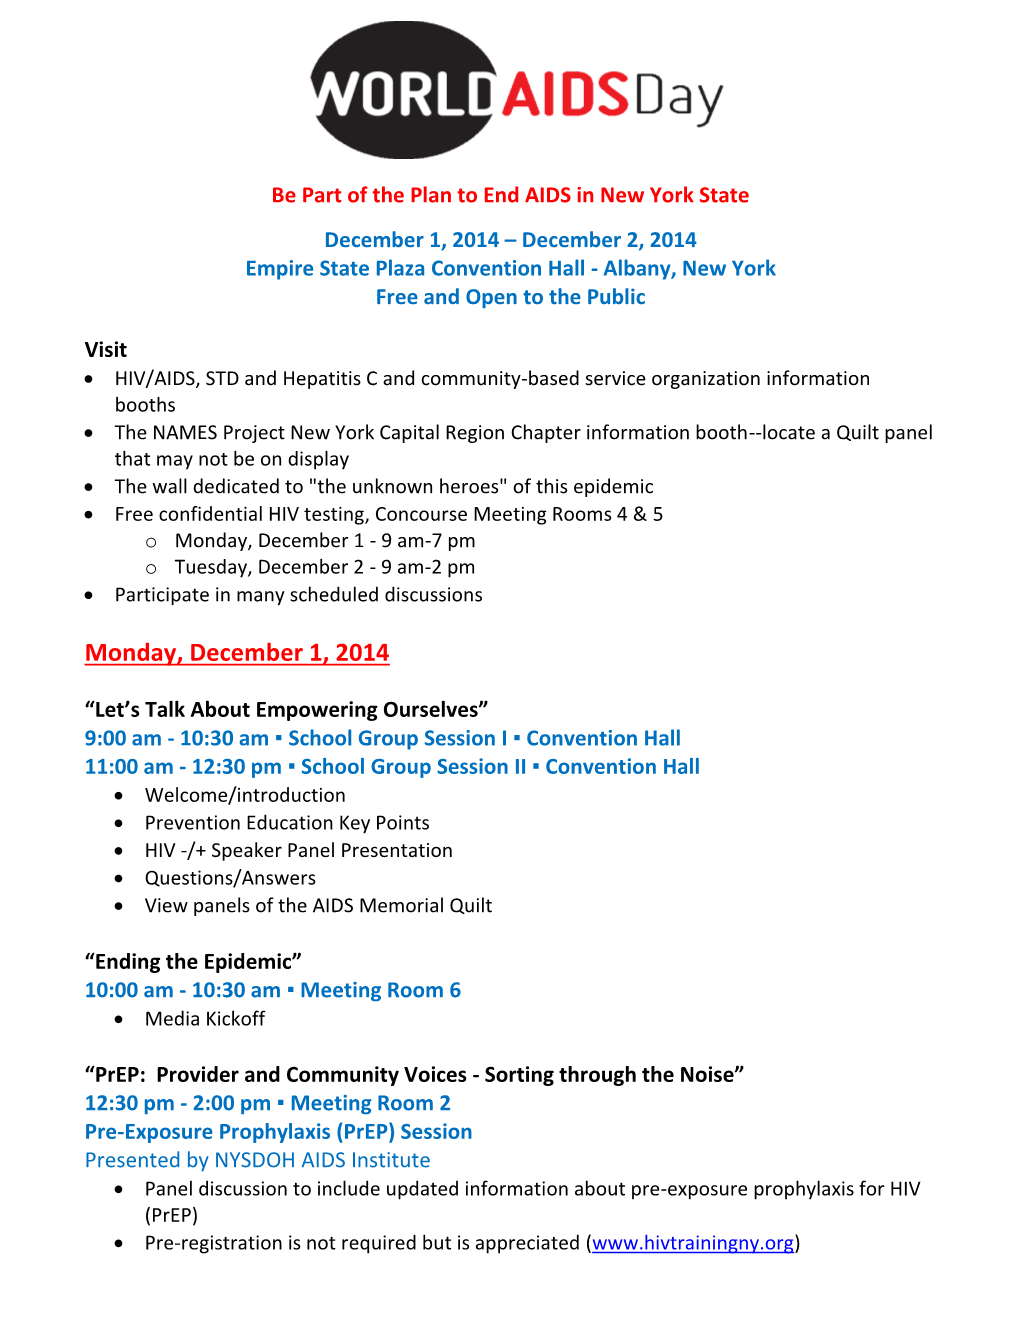 World AIDS Day 2014 Schedule of Events